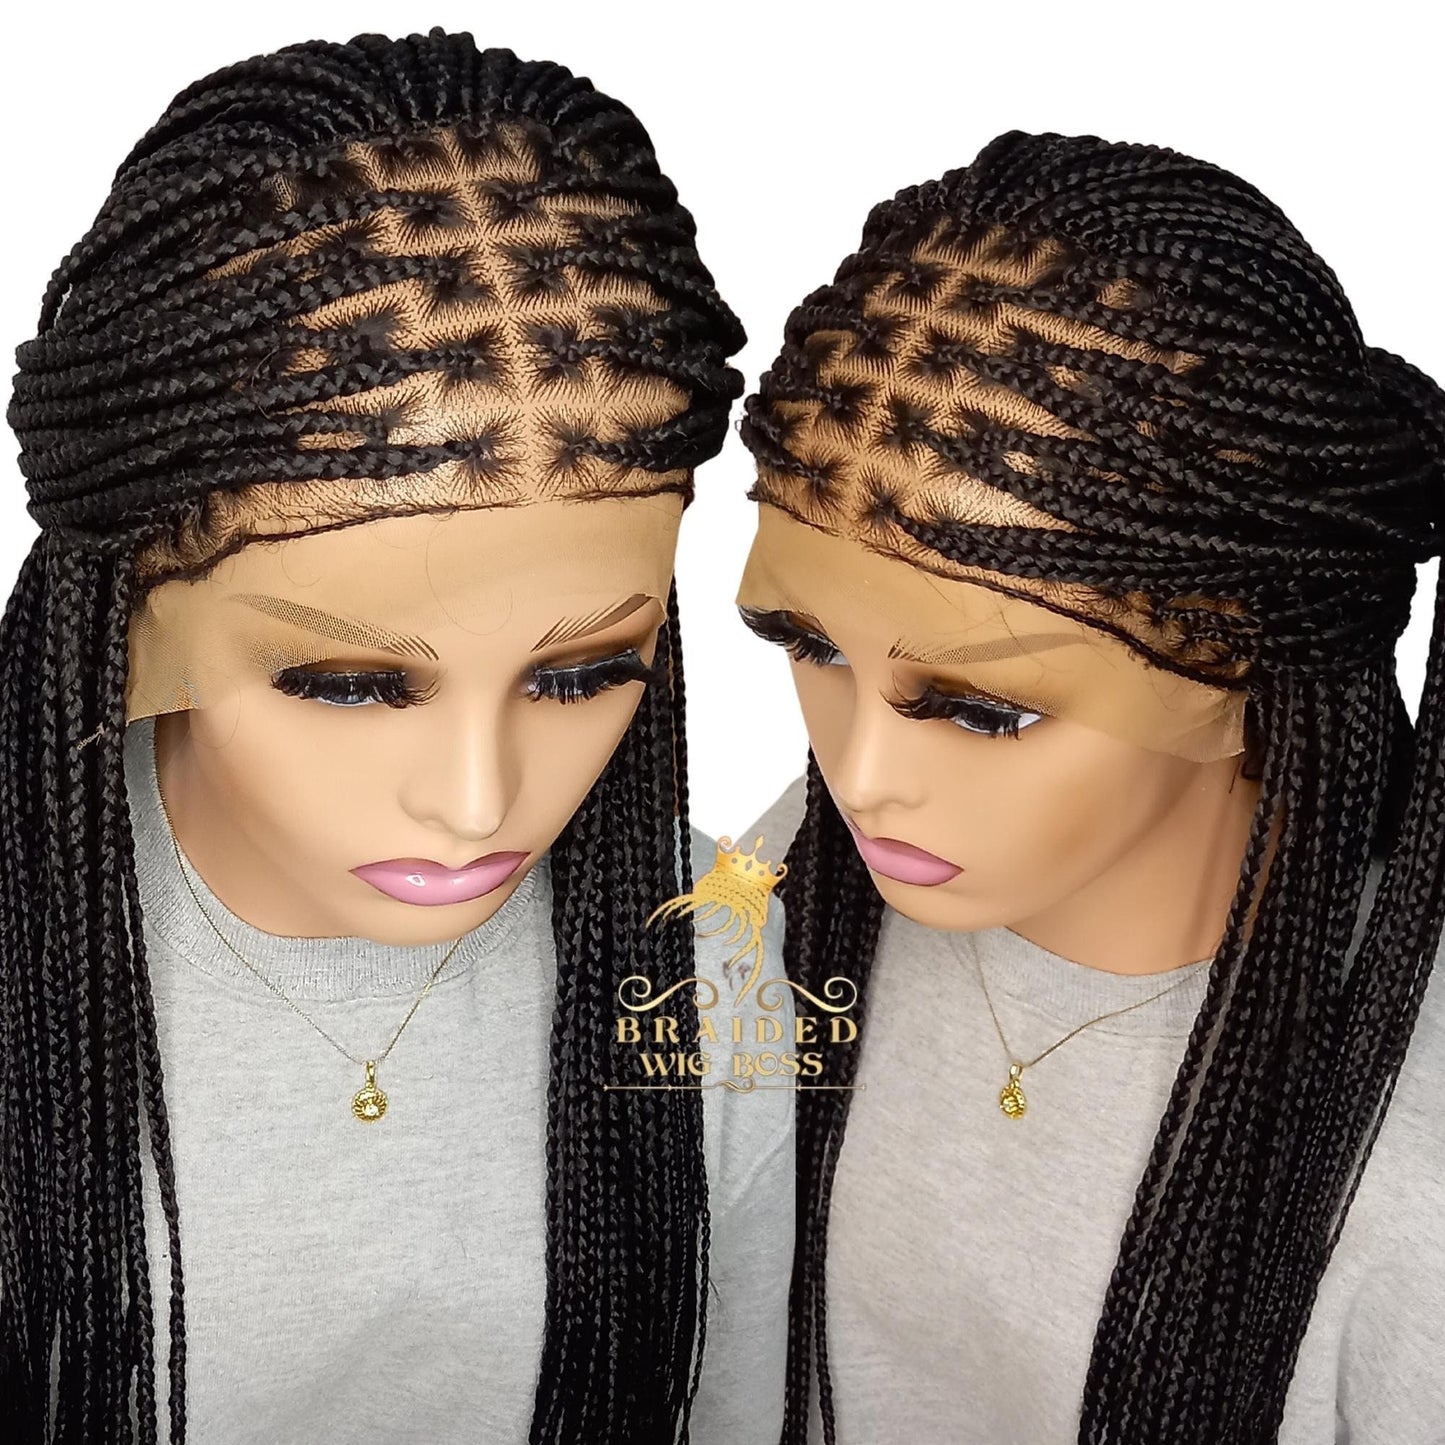 13x4 Knotless Braid Wig for Black Women - Box Braids Synthetic Braided Lace Front Wig in Color 2 Available in Multiple Lengths and Colors - BRAIDED WIG BOSS